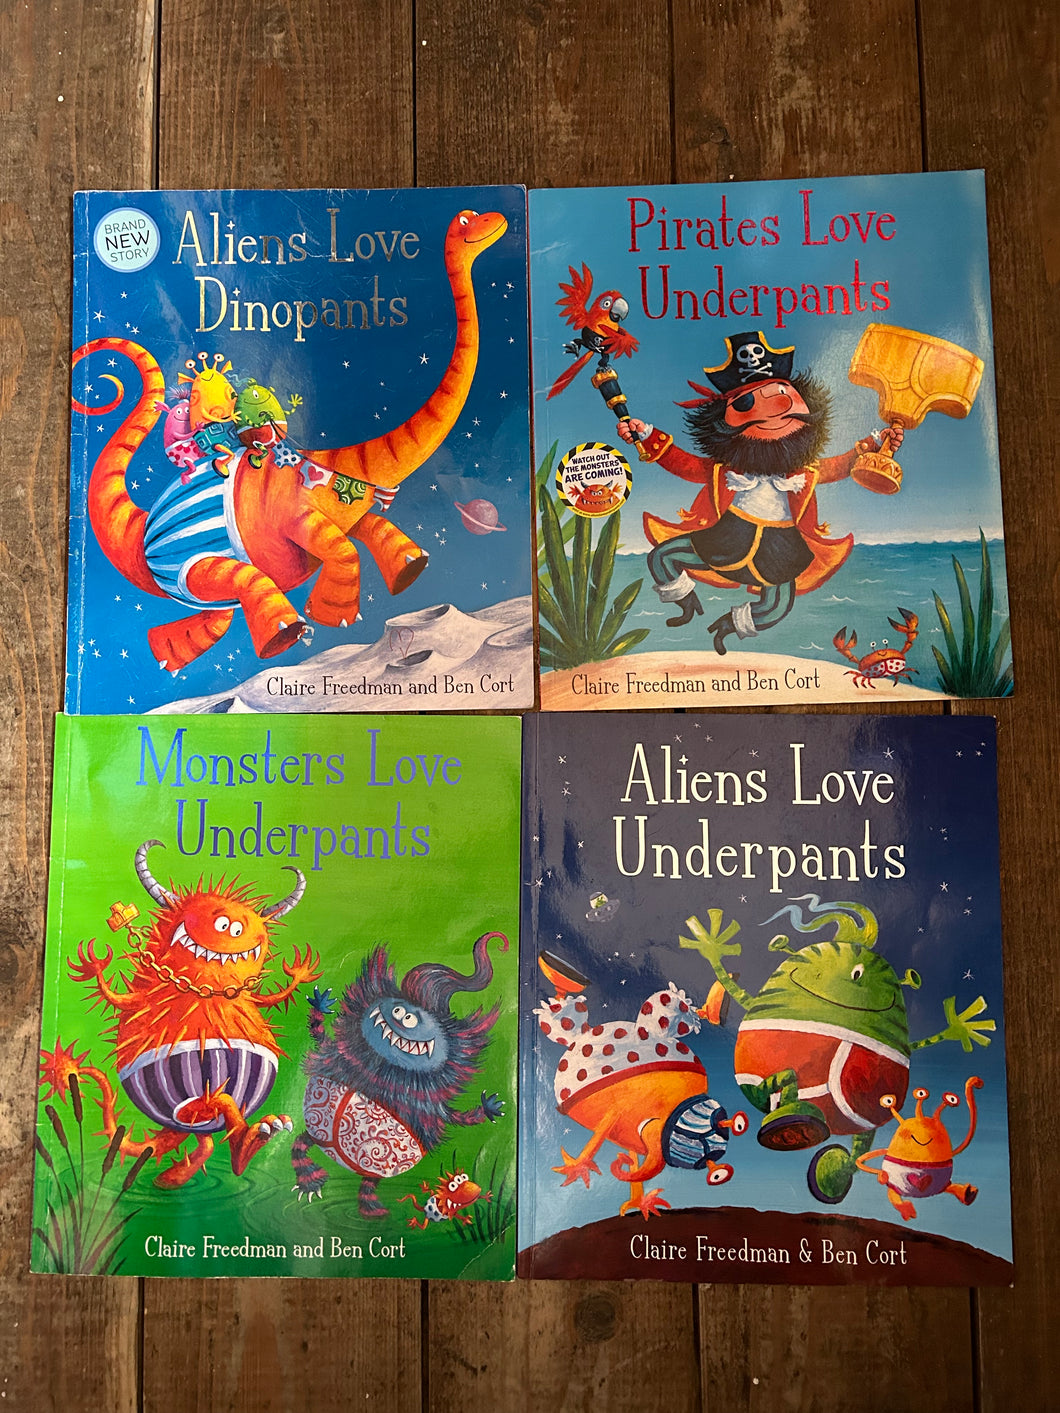 Underpants book set by Claire Freedman